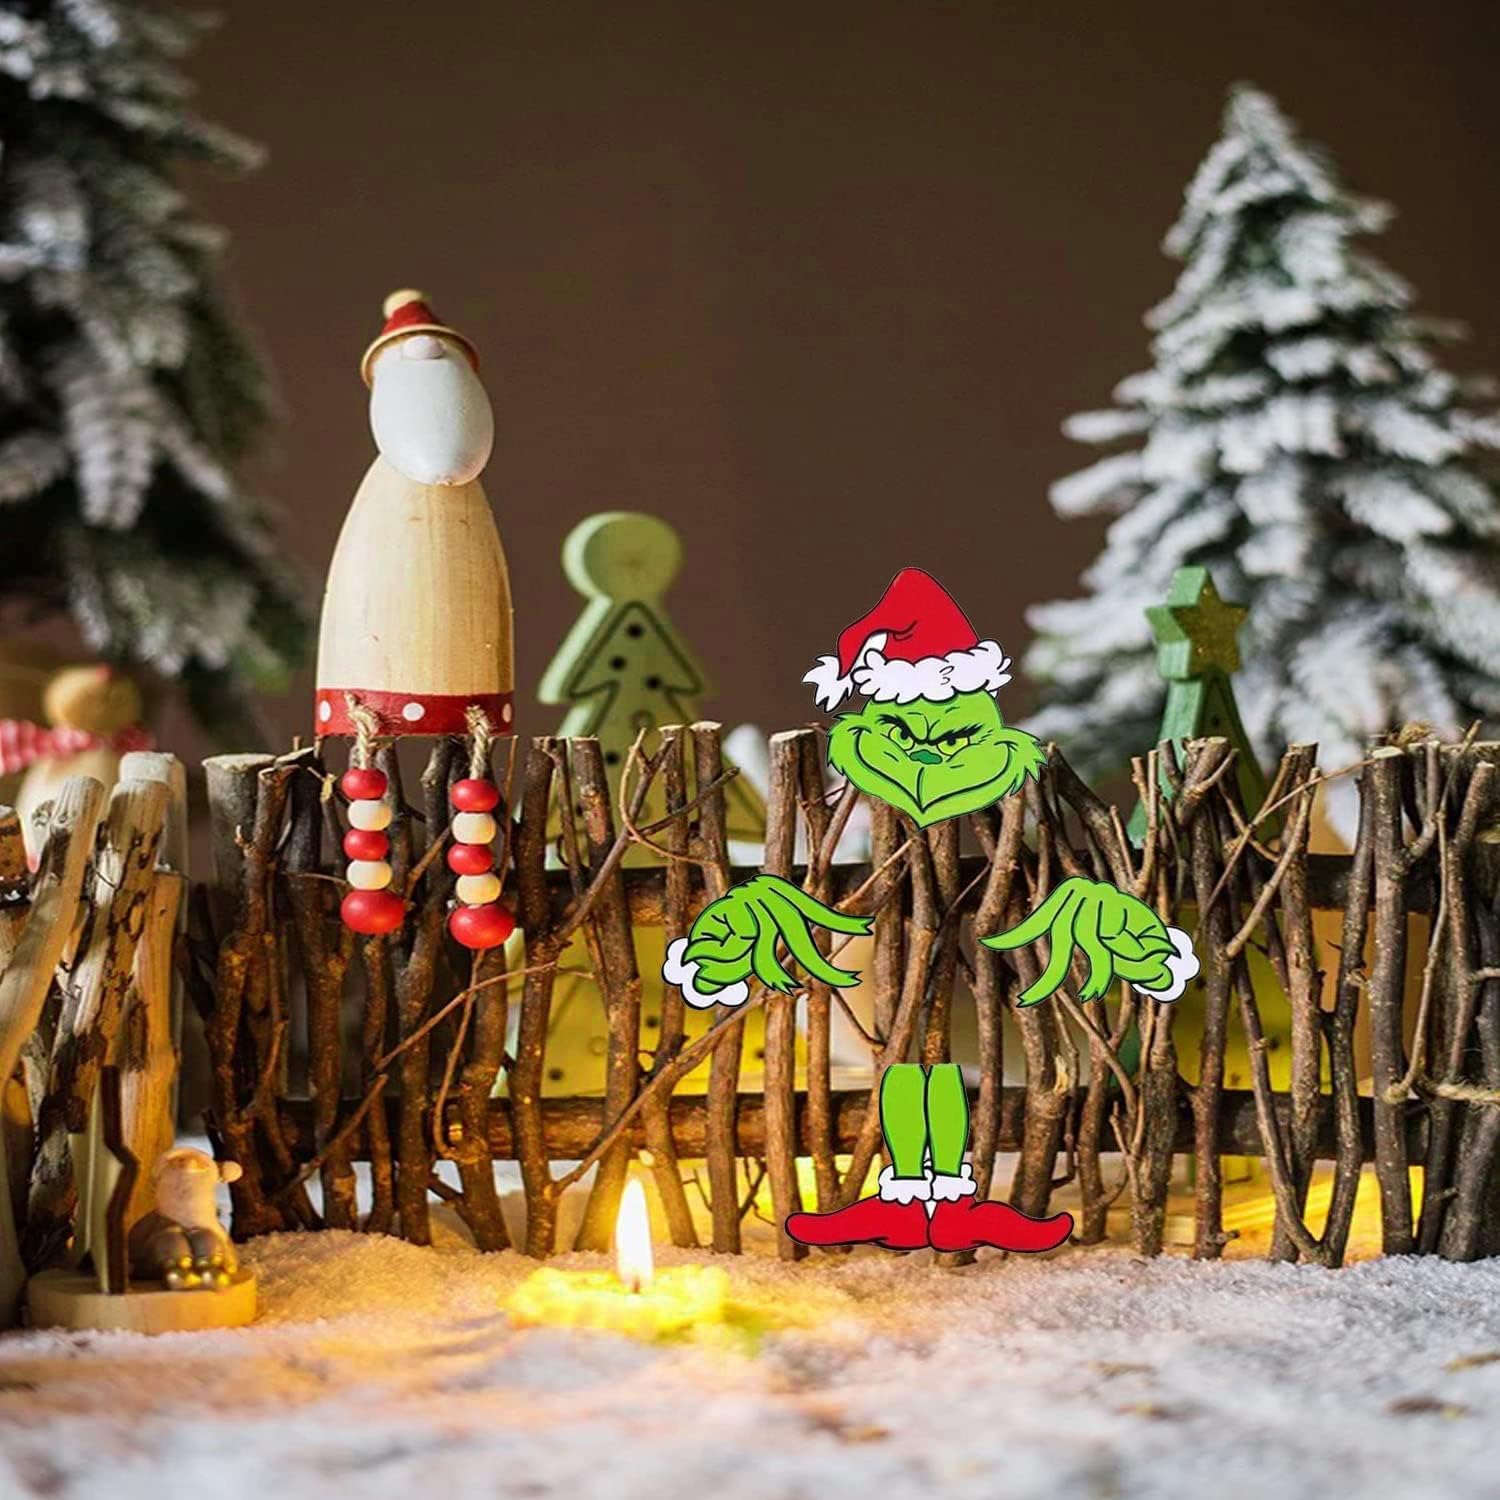 Let's Get Grinchy With The Grinch Christmas Tree Topper!